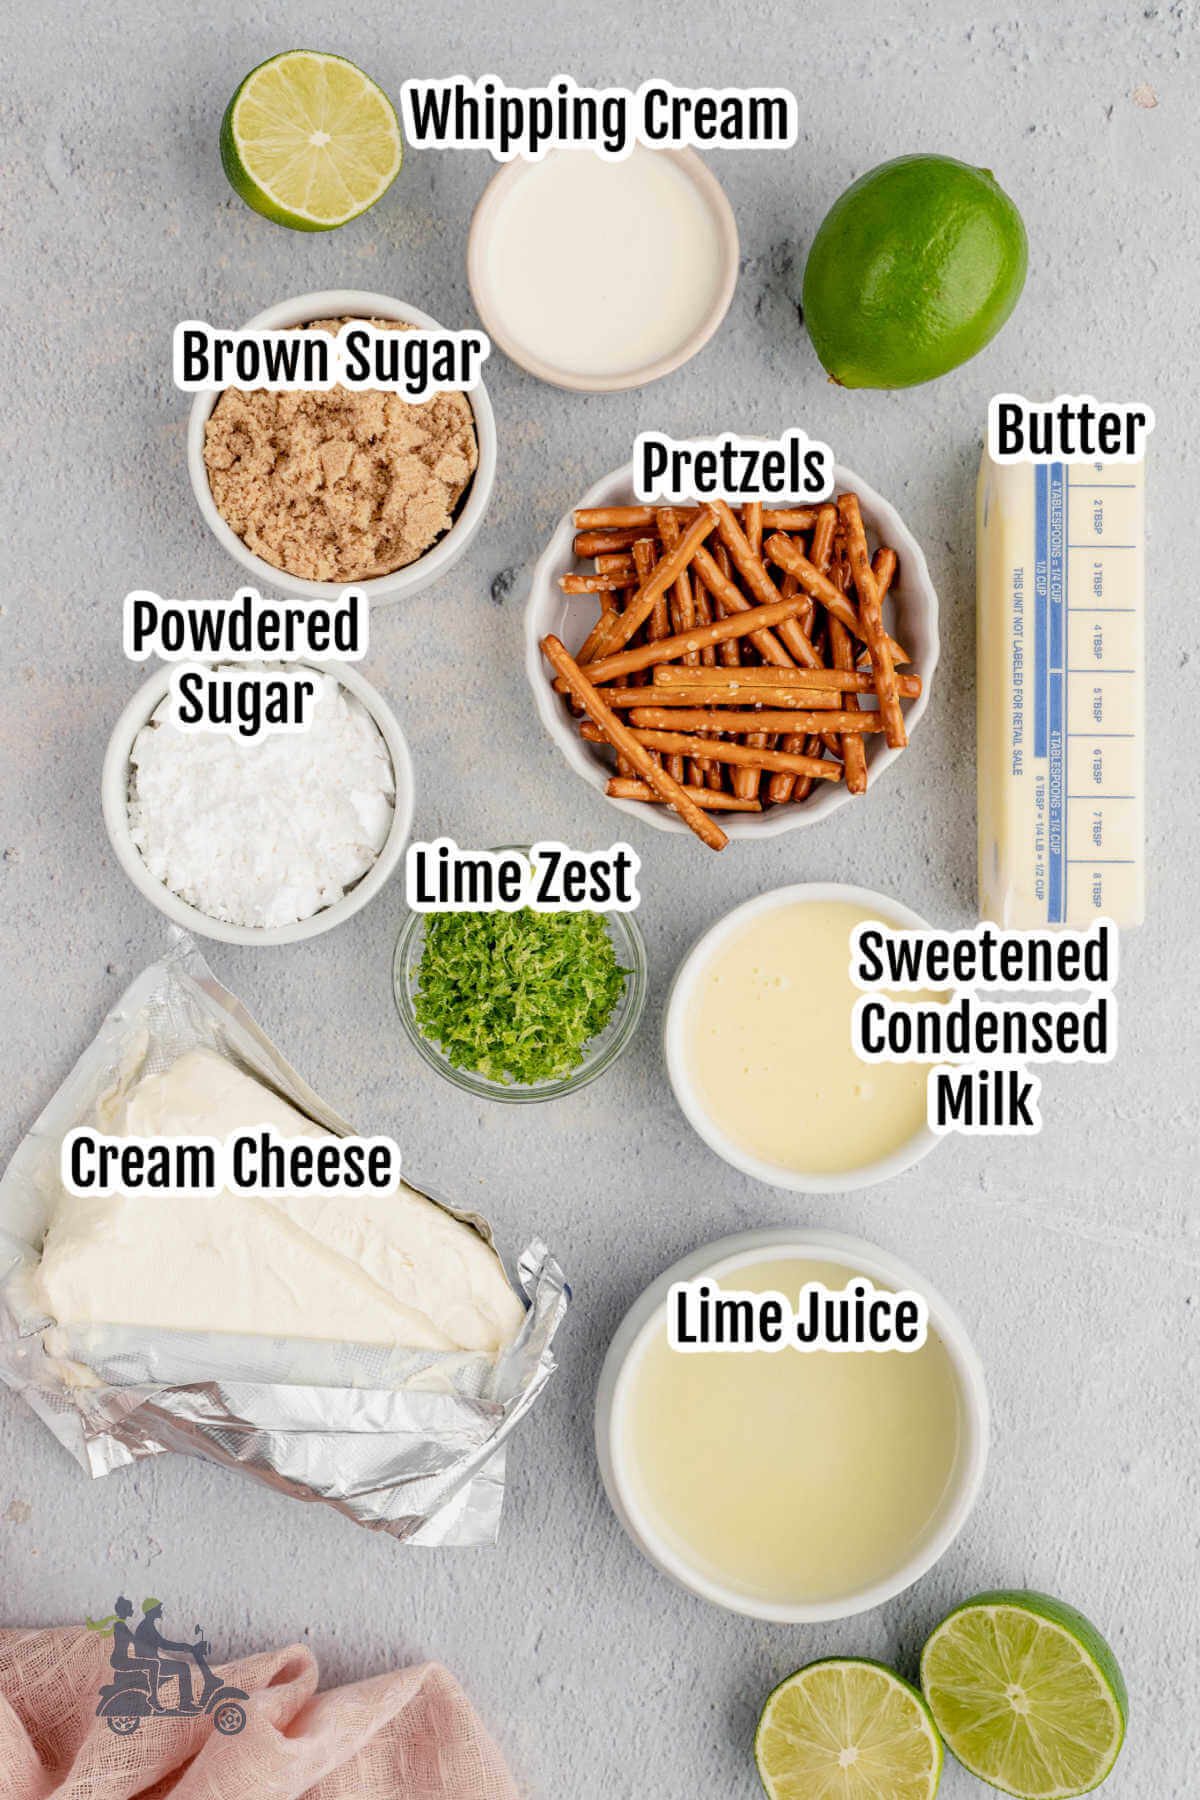 Image of the ingredients needed to make no bake Key Lime Pie recipe with Pretzel crust. 